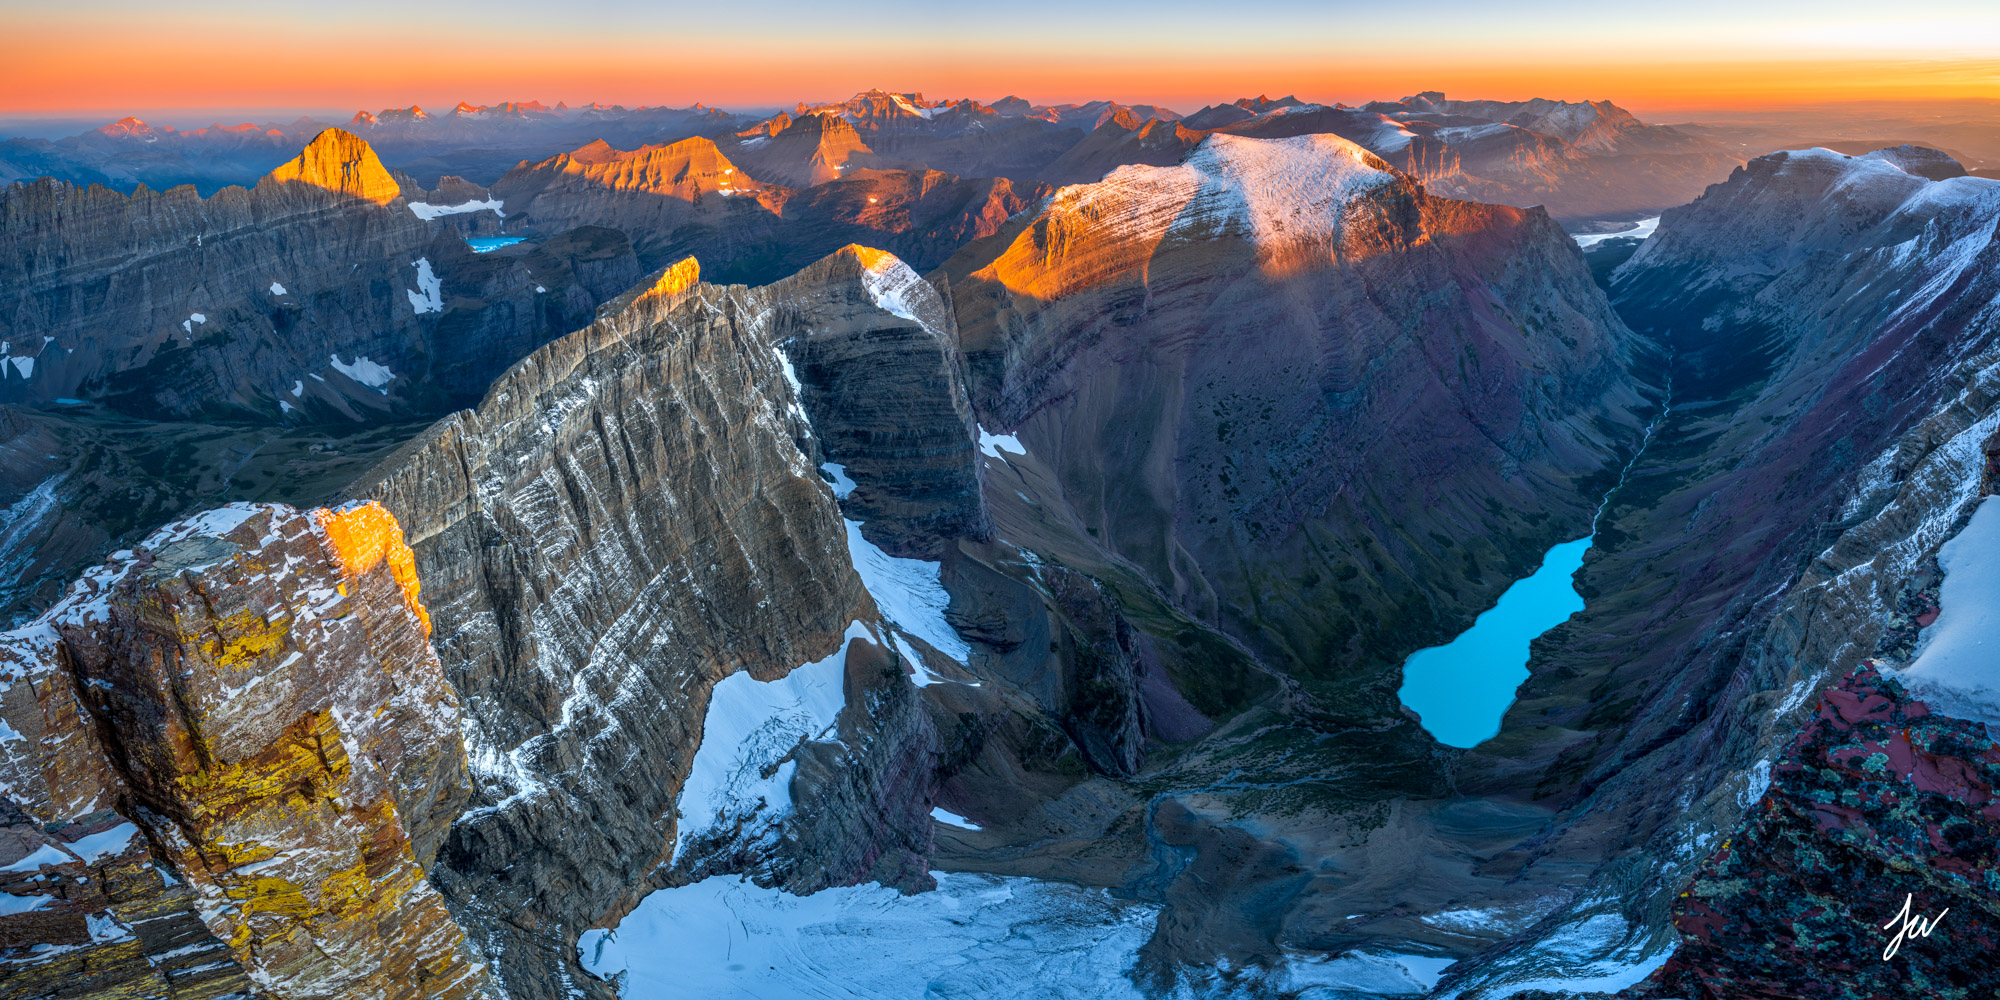 Sunrise panorama from summit of Mt Siyeh in Glacier Park.